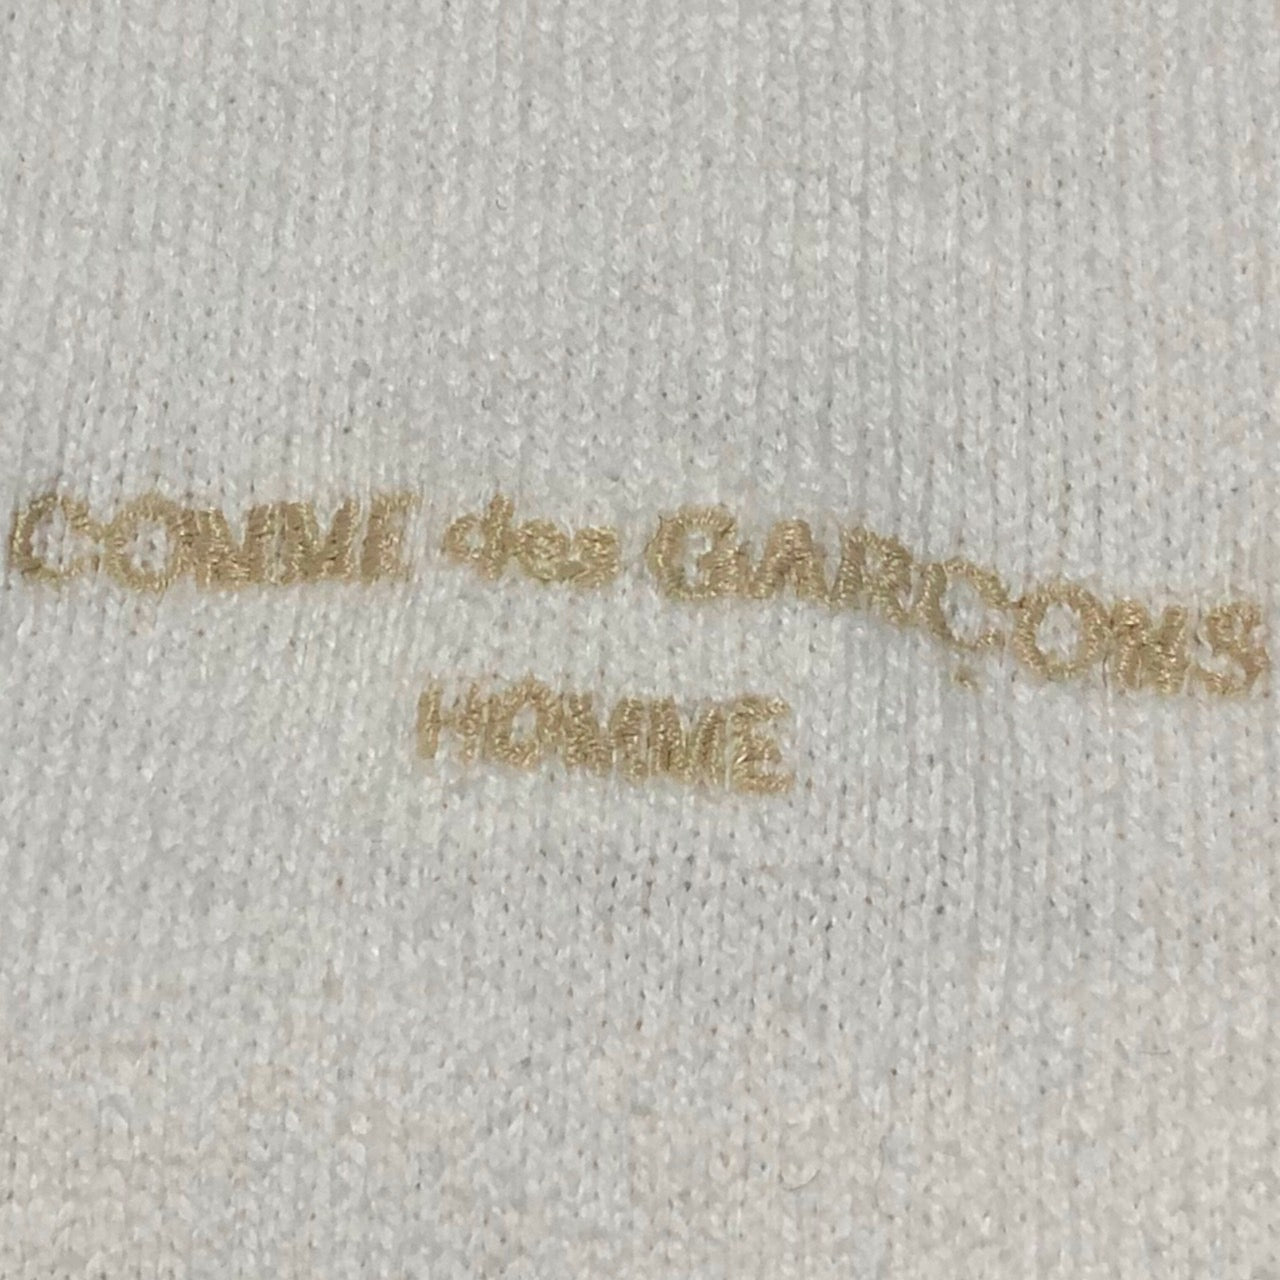 COMME des GARCONS HOMME(コムデギャルソンオム) 80's One-point logo embroidered cotton cardigan/ワンポイントロゴ刺繍コットンカーディガン/80年代/ヴィンテージ/川久保玲/本人期 HT-110030 SIZE FREE(M～L程度) ホワイト AD1989